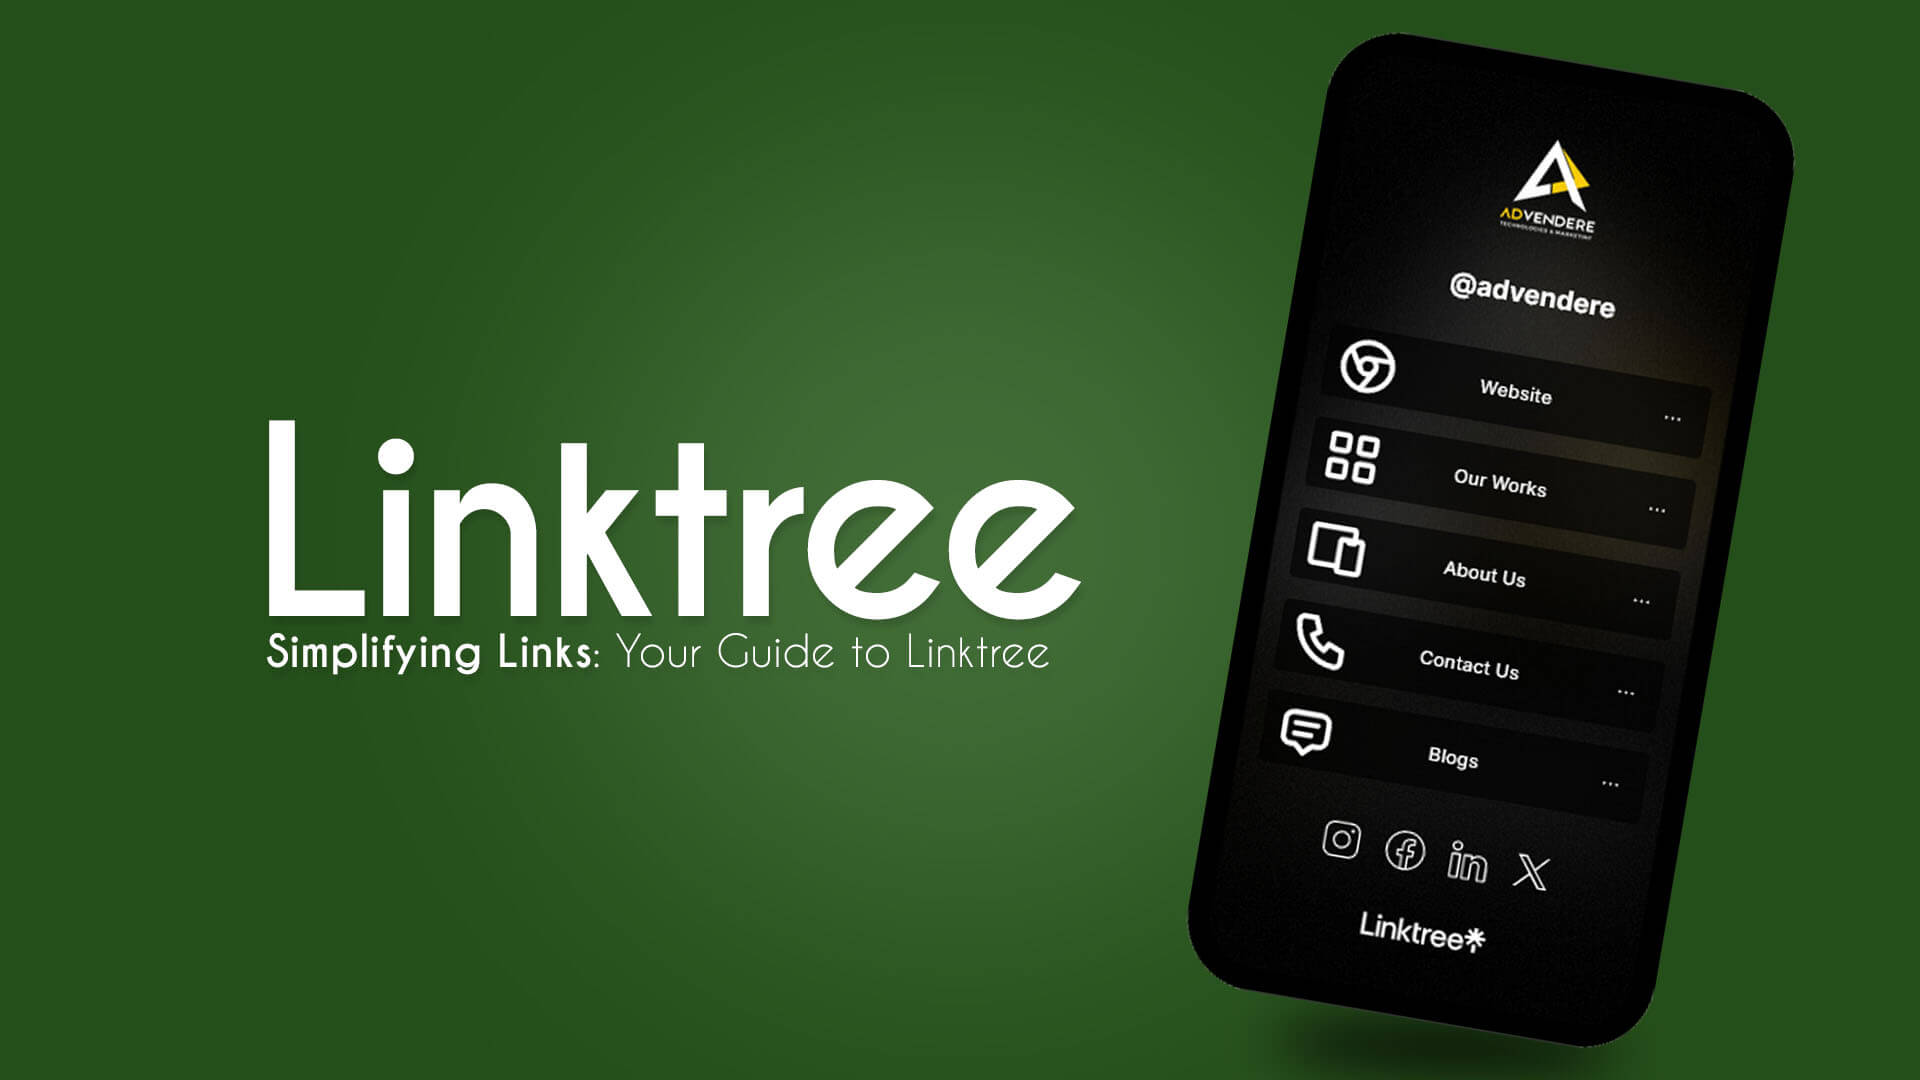 Create an account in Linktree